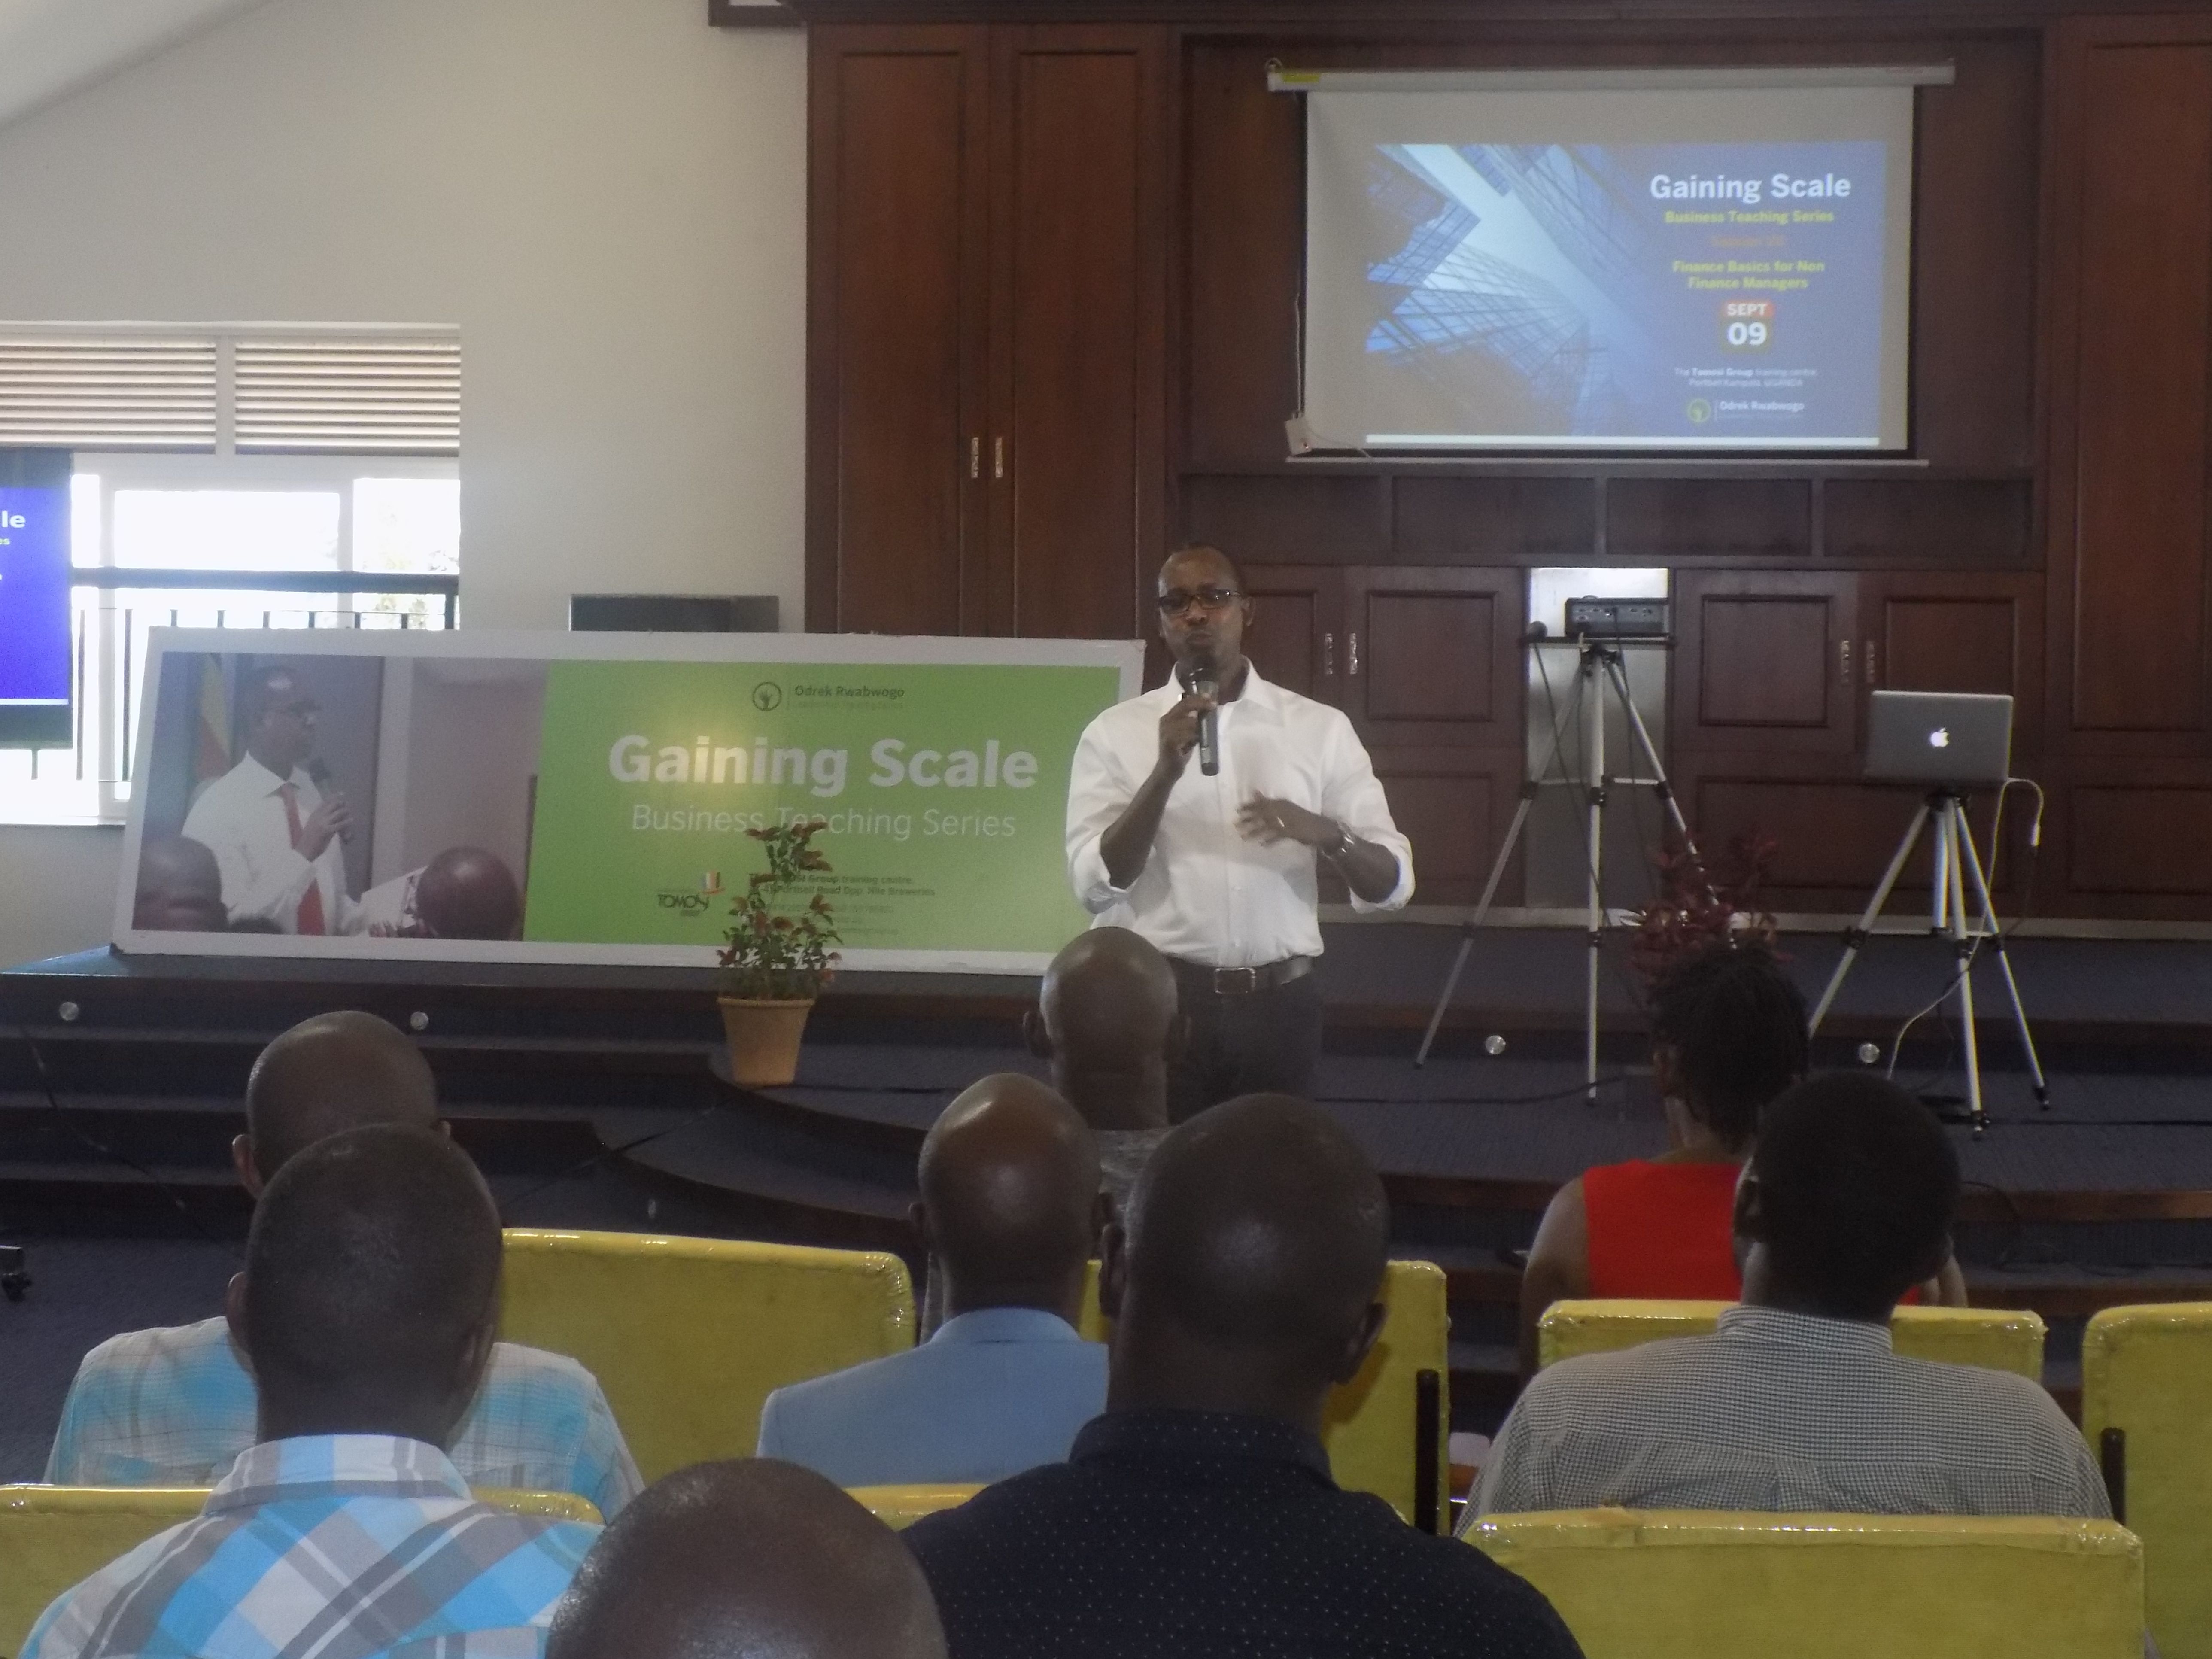 Second Public Lecture On Gaining Scale Enterprise Held At Tomosi Group